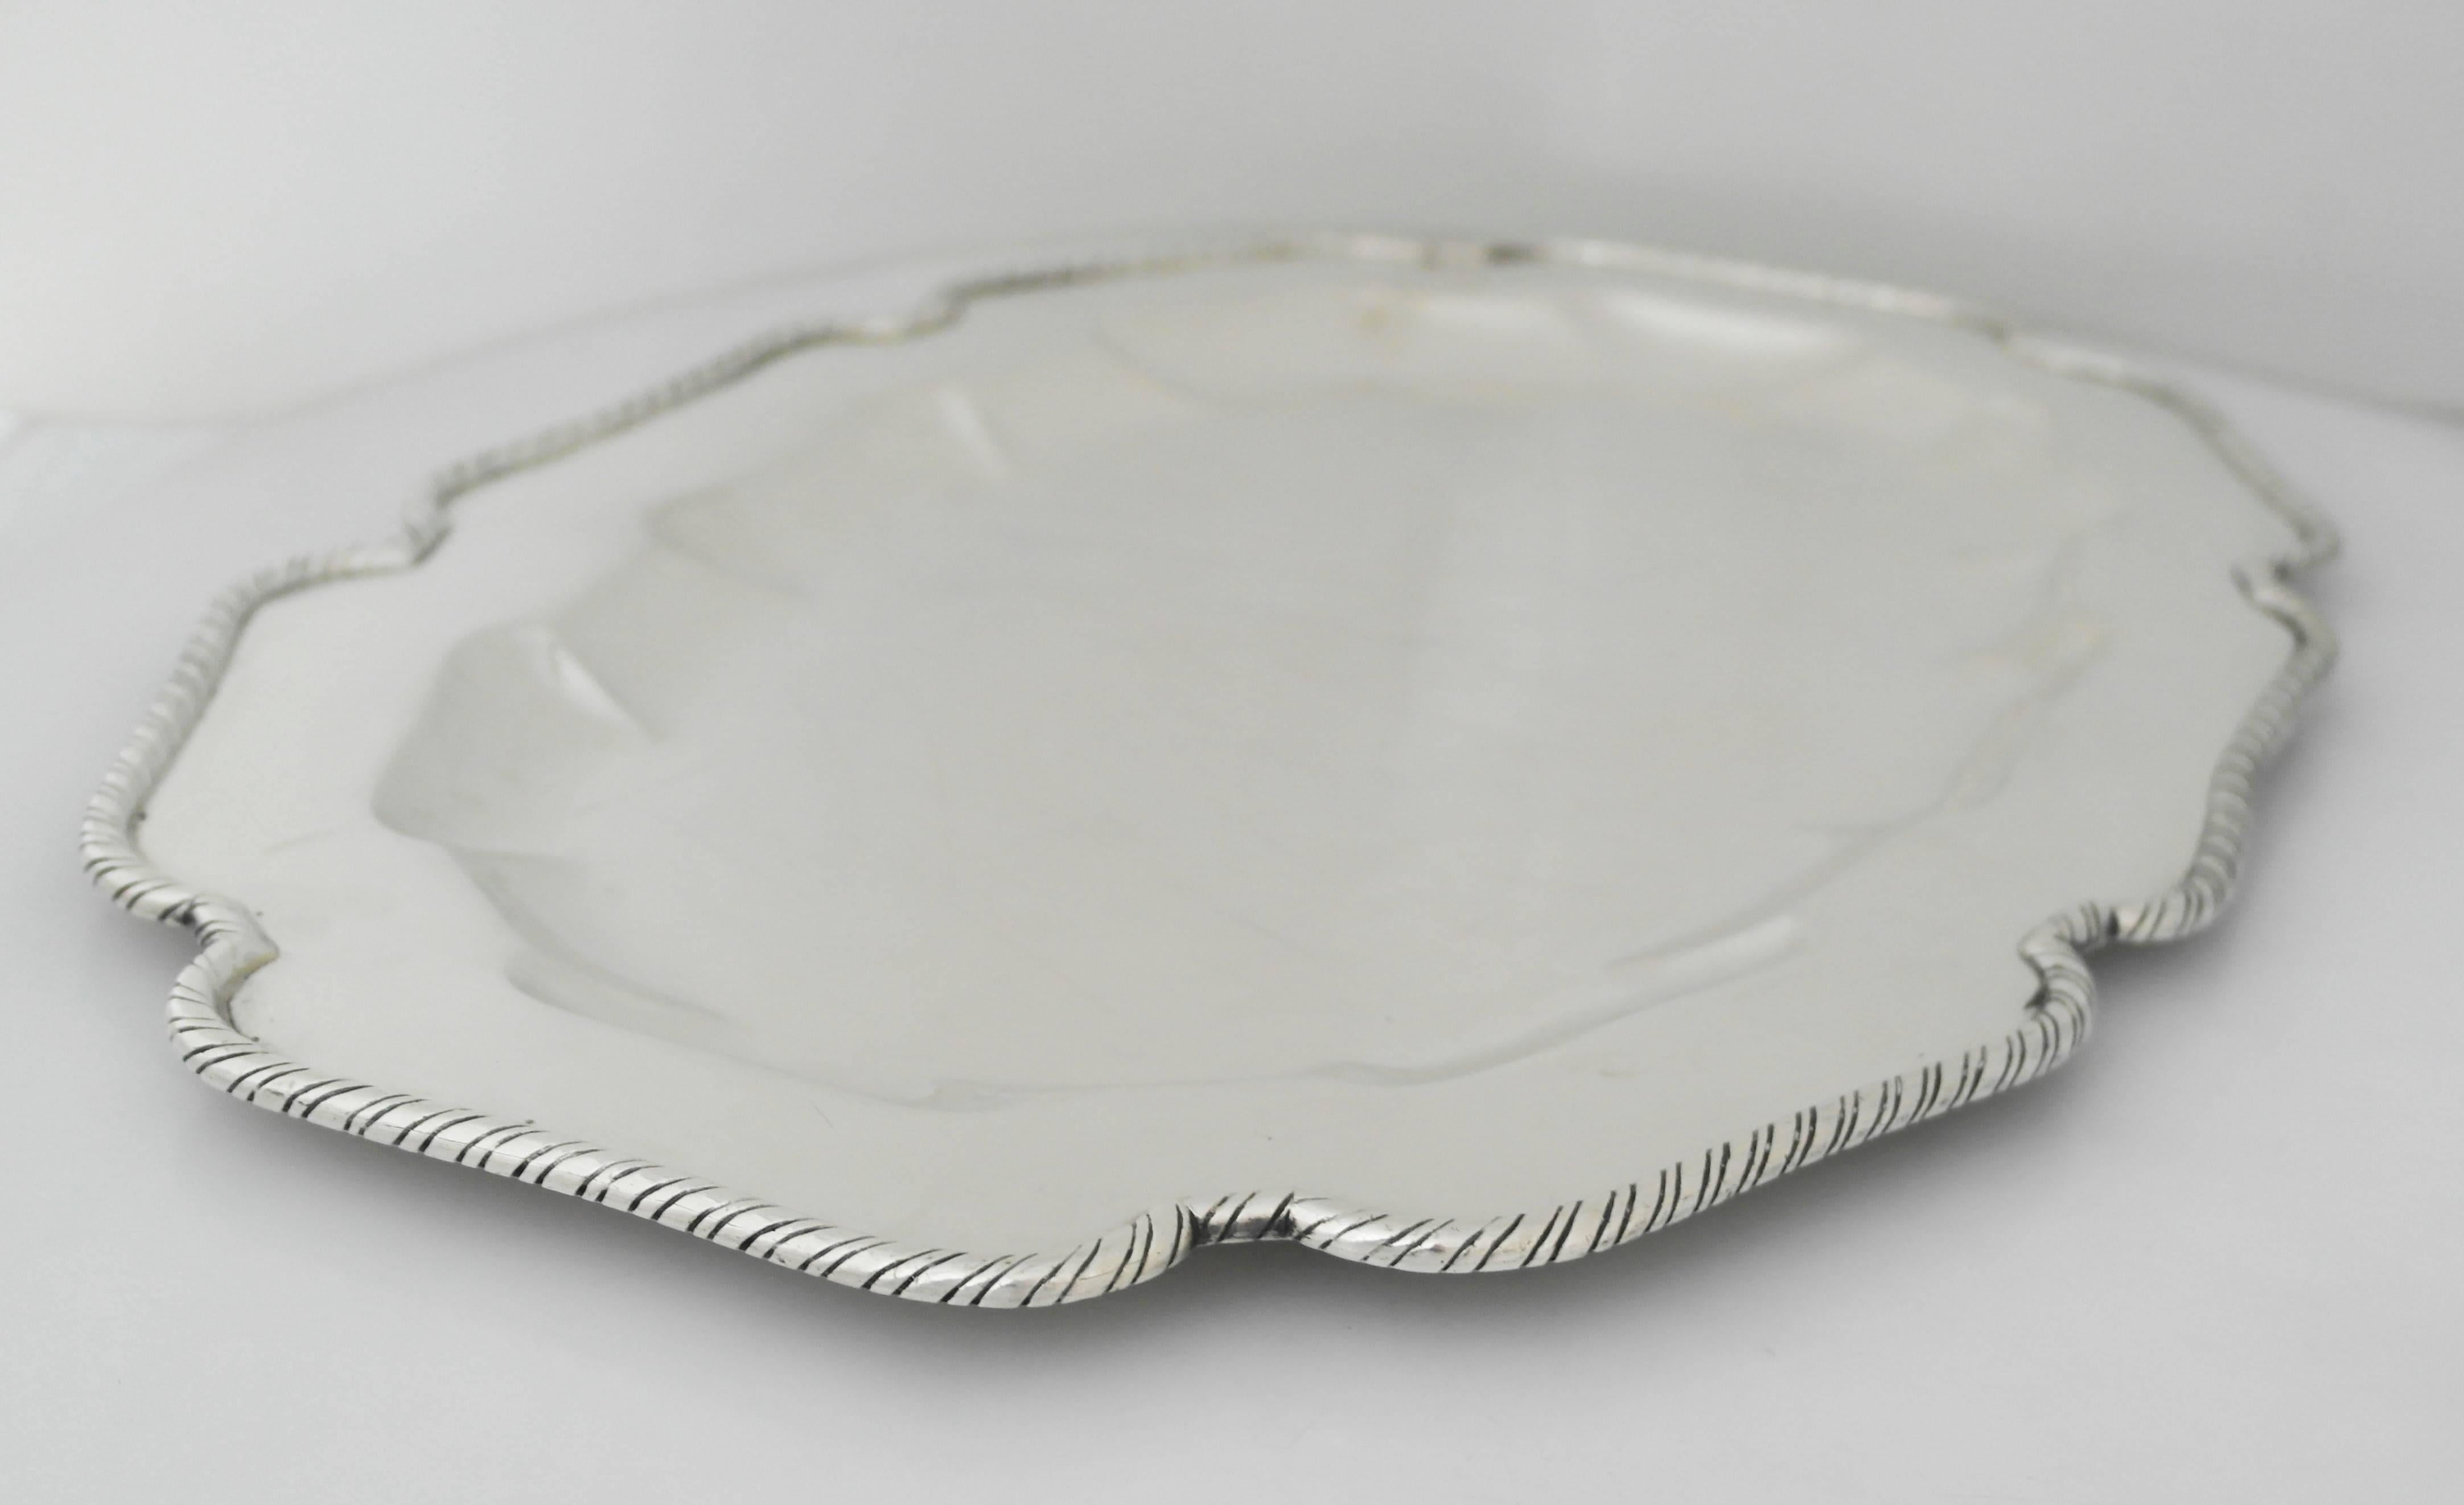 American Large William Spratling Large Hand-Wrought Sterling Silver Tray, Patter 1940 For Sale